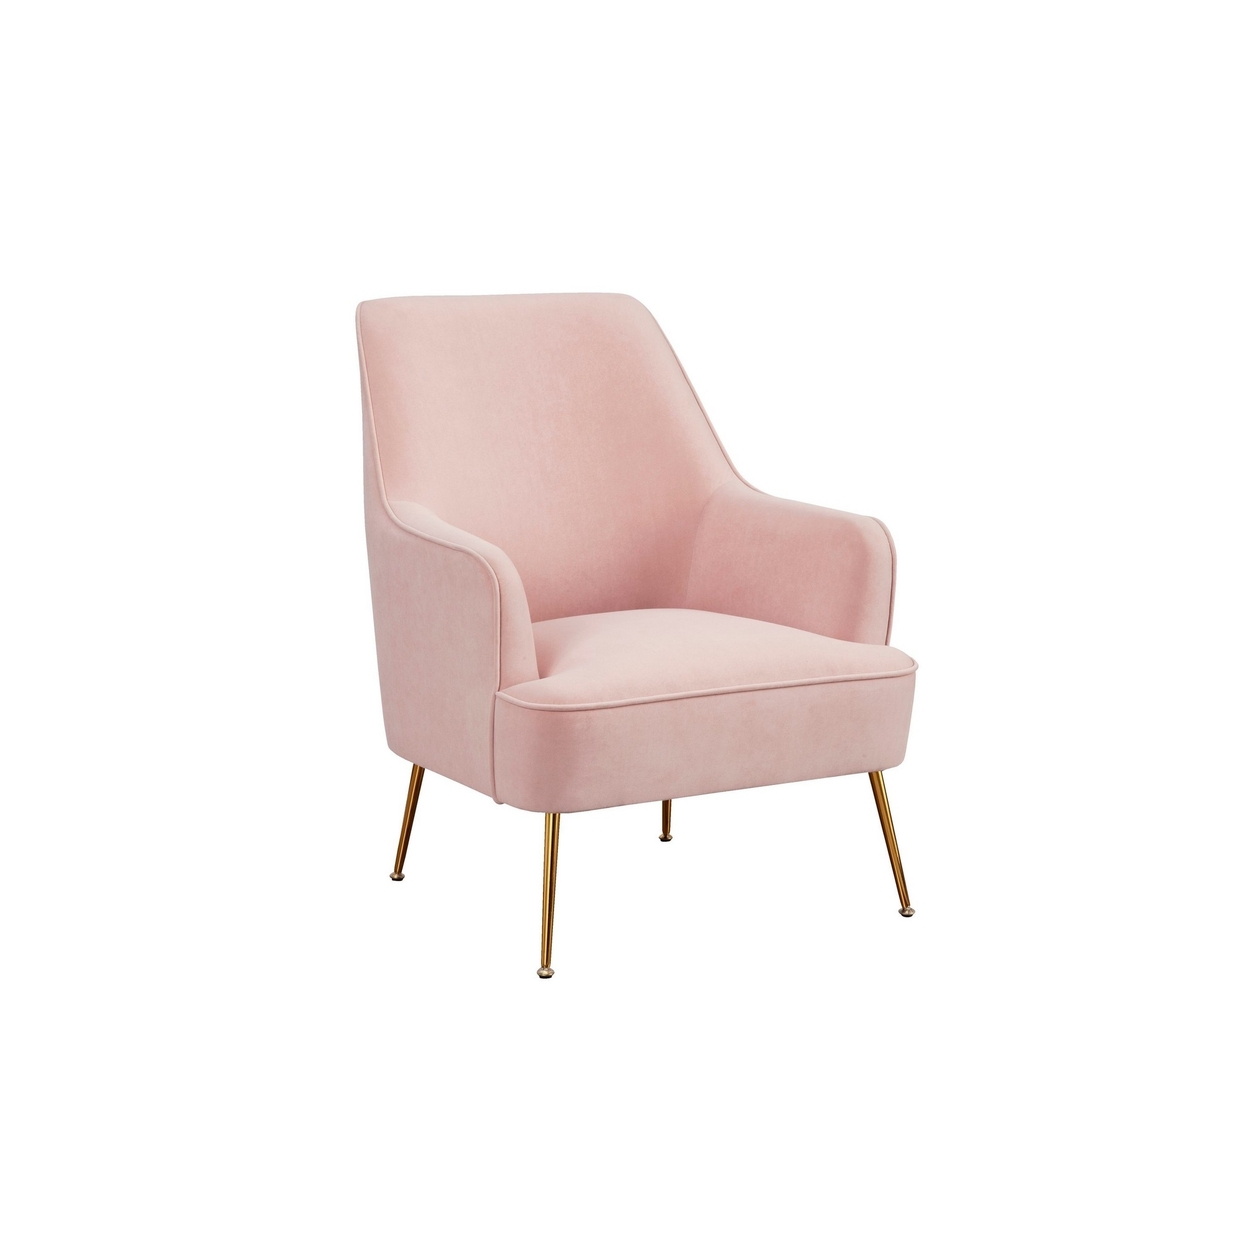 Accent Chair With T Cushioned Seat And Metal Legs, Pink- Saltoro Sherpi